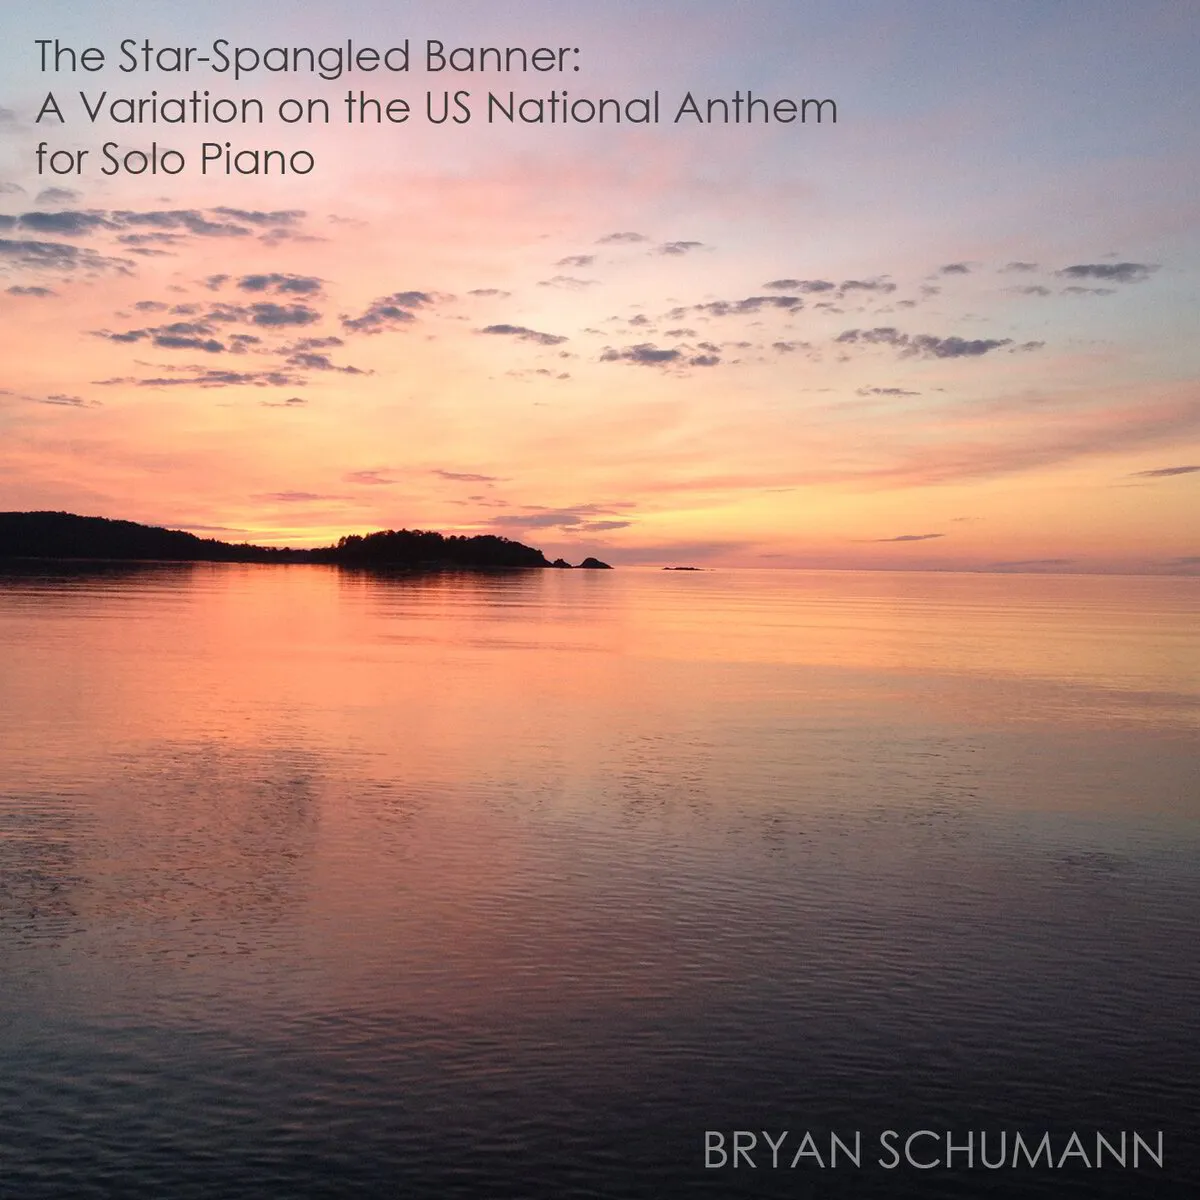 The Star-Spangled Banner: A Variation on the US National Anthem for Solo Piano (audio download)